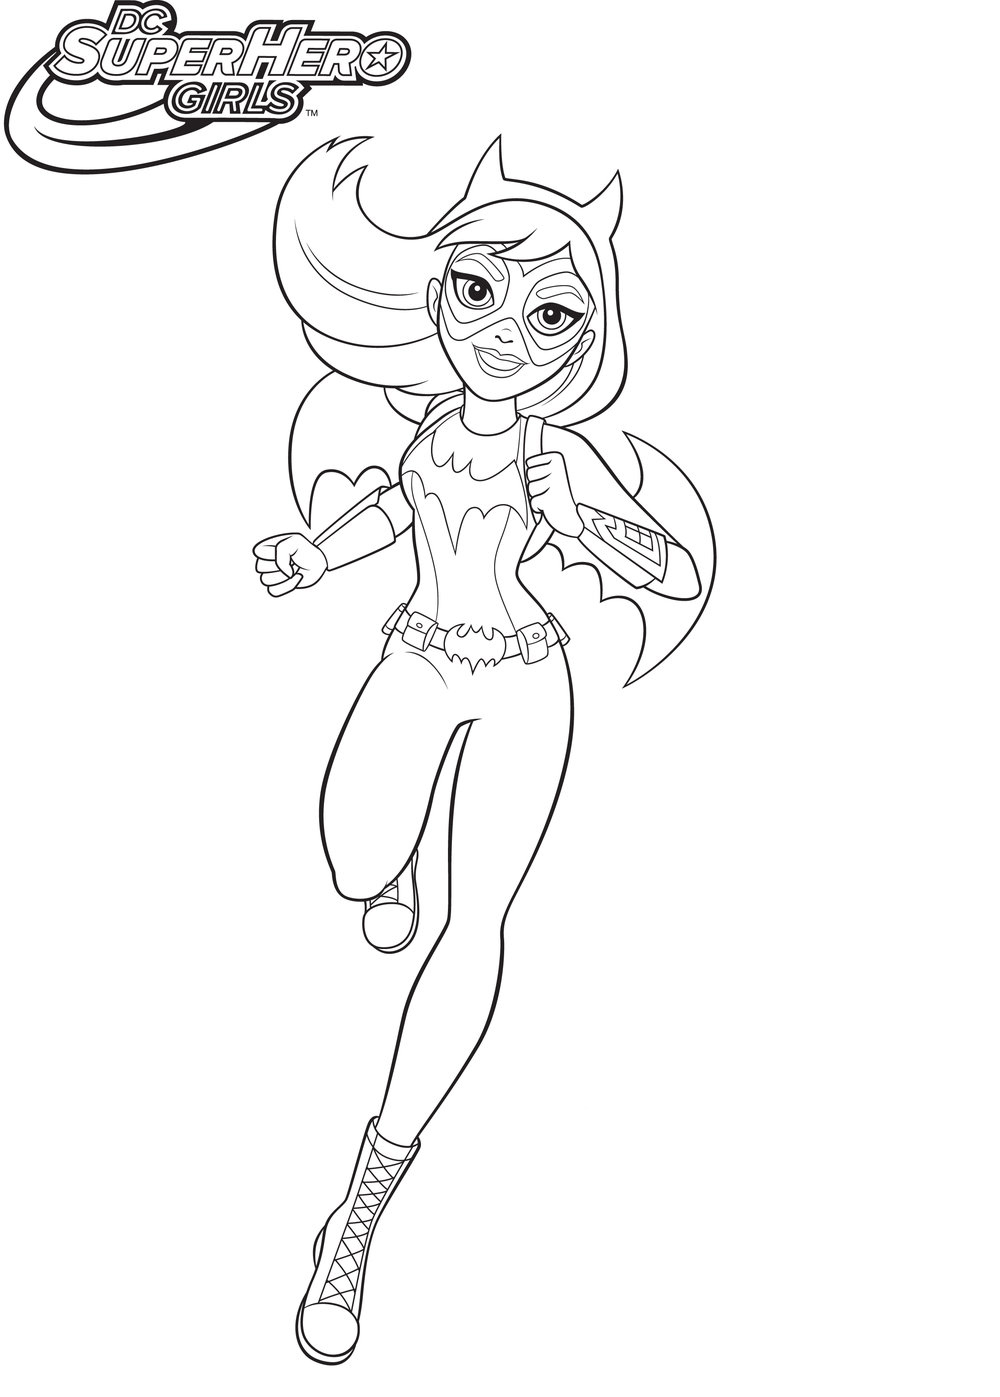 Featured image of post Lego Dc Superhero Girls Coloring Pages All characters and images of the dc superhero girls are copyright dc comics and right holders